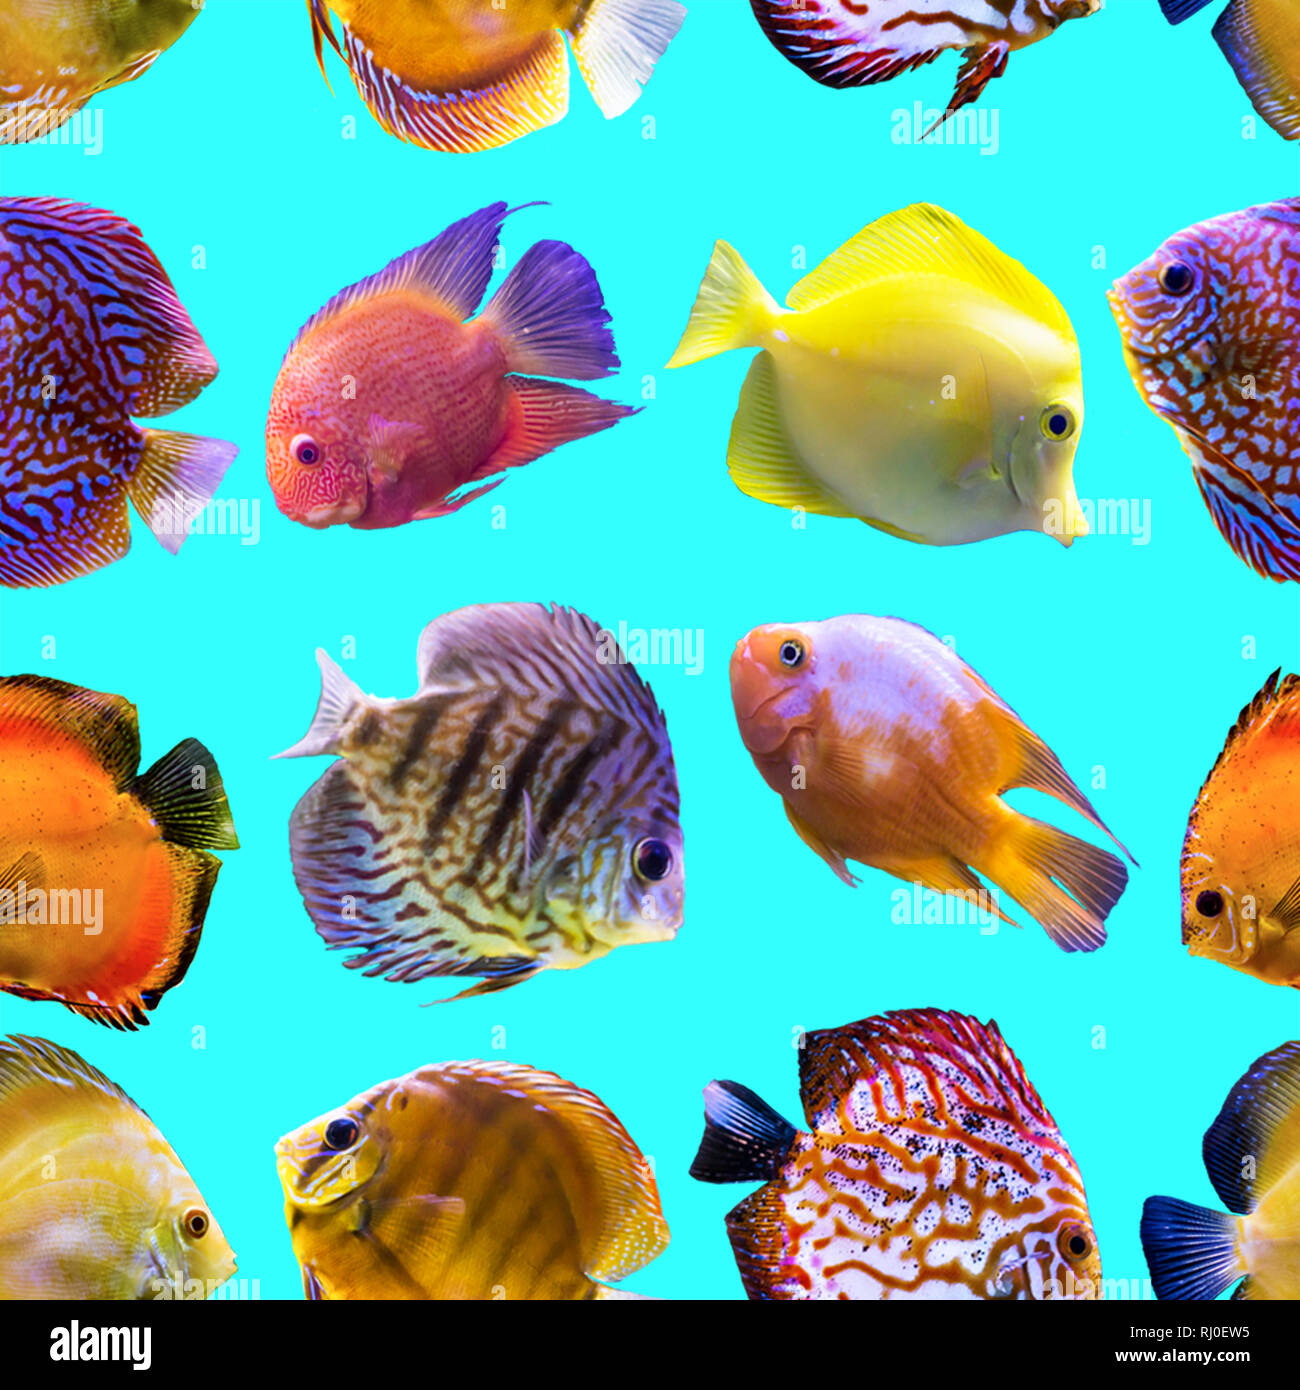 Seamless pattern. Multi-colored fishes on a blue background. Site about nature, art, animals, sea, fish. Stock Photo